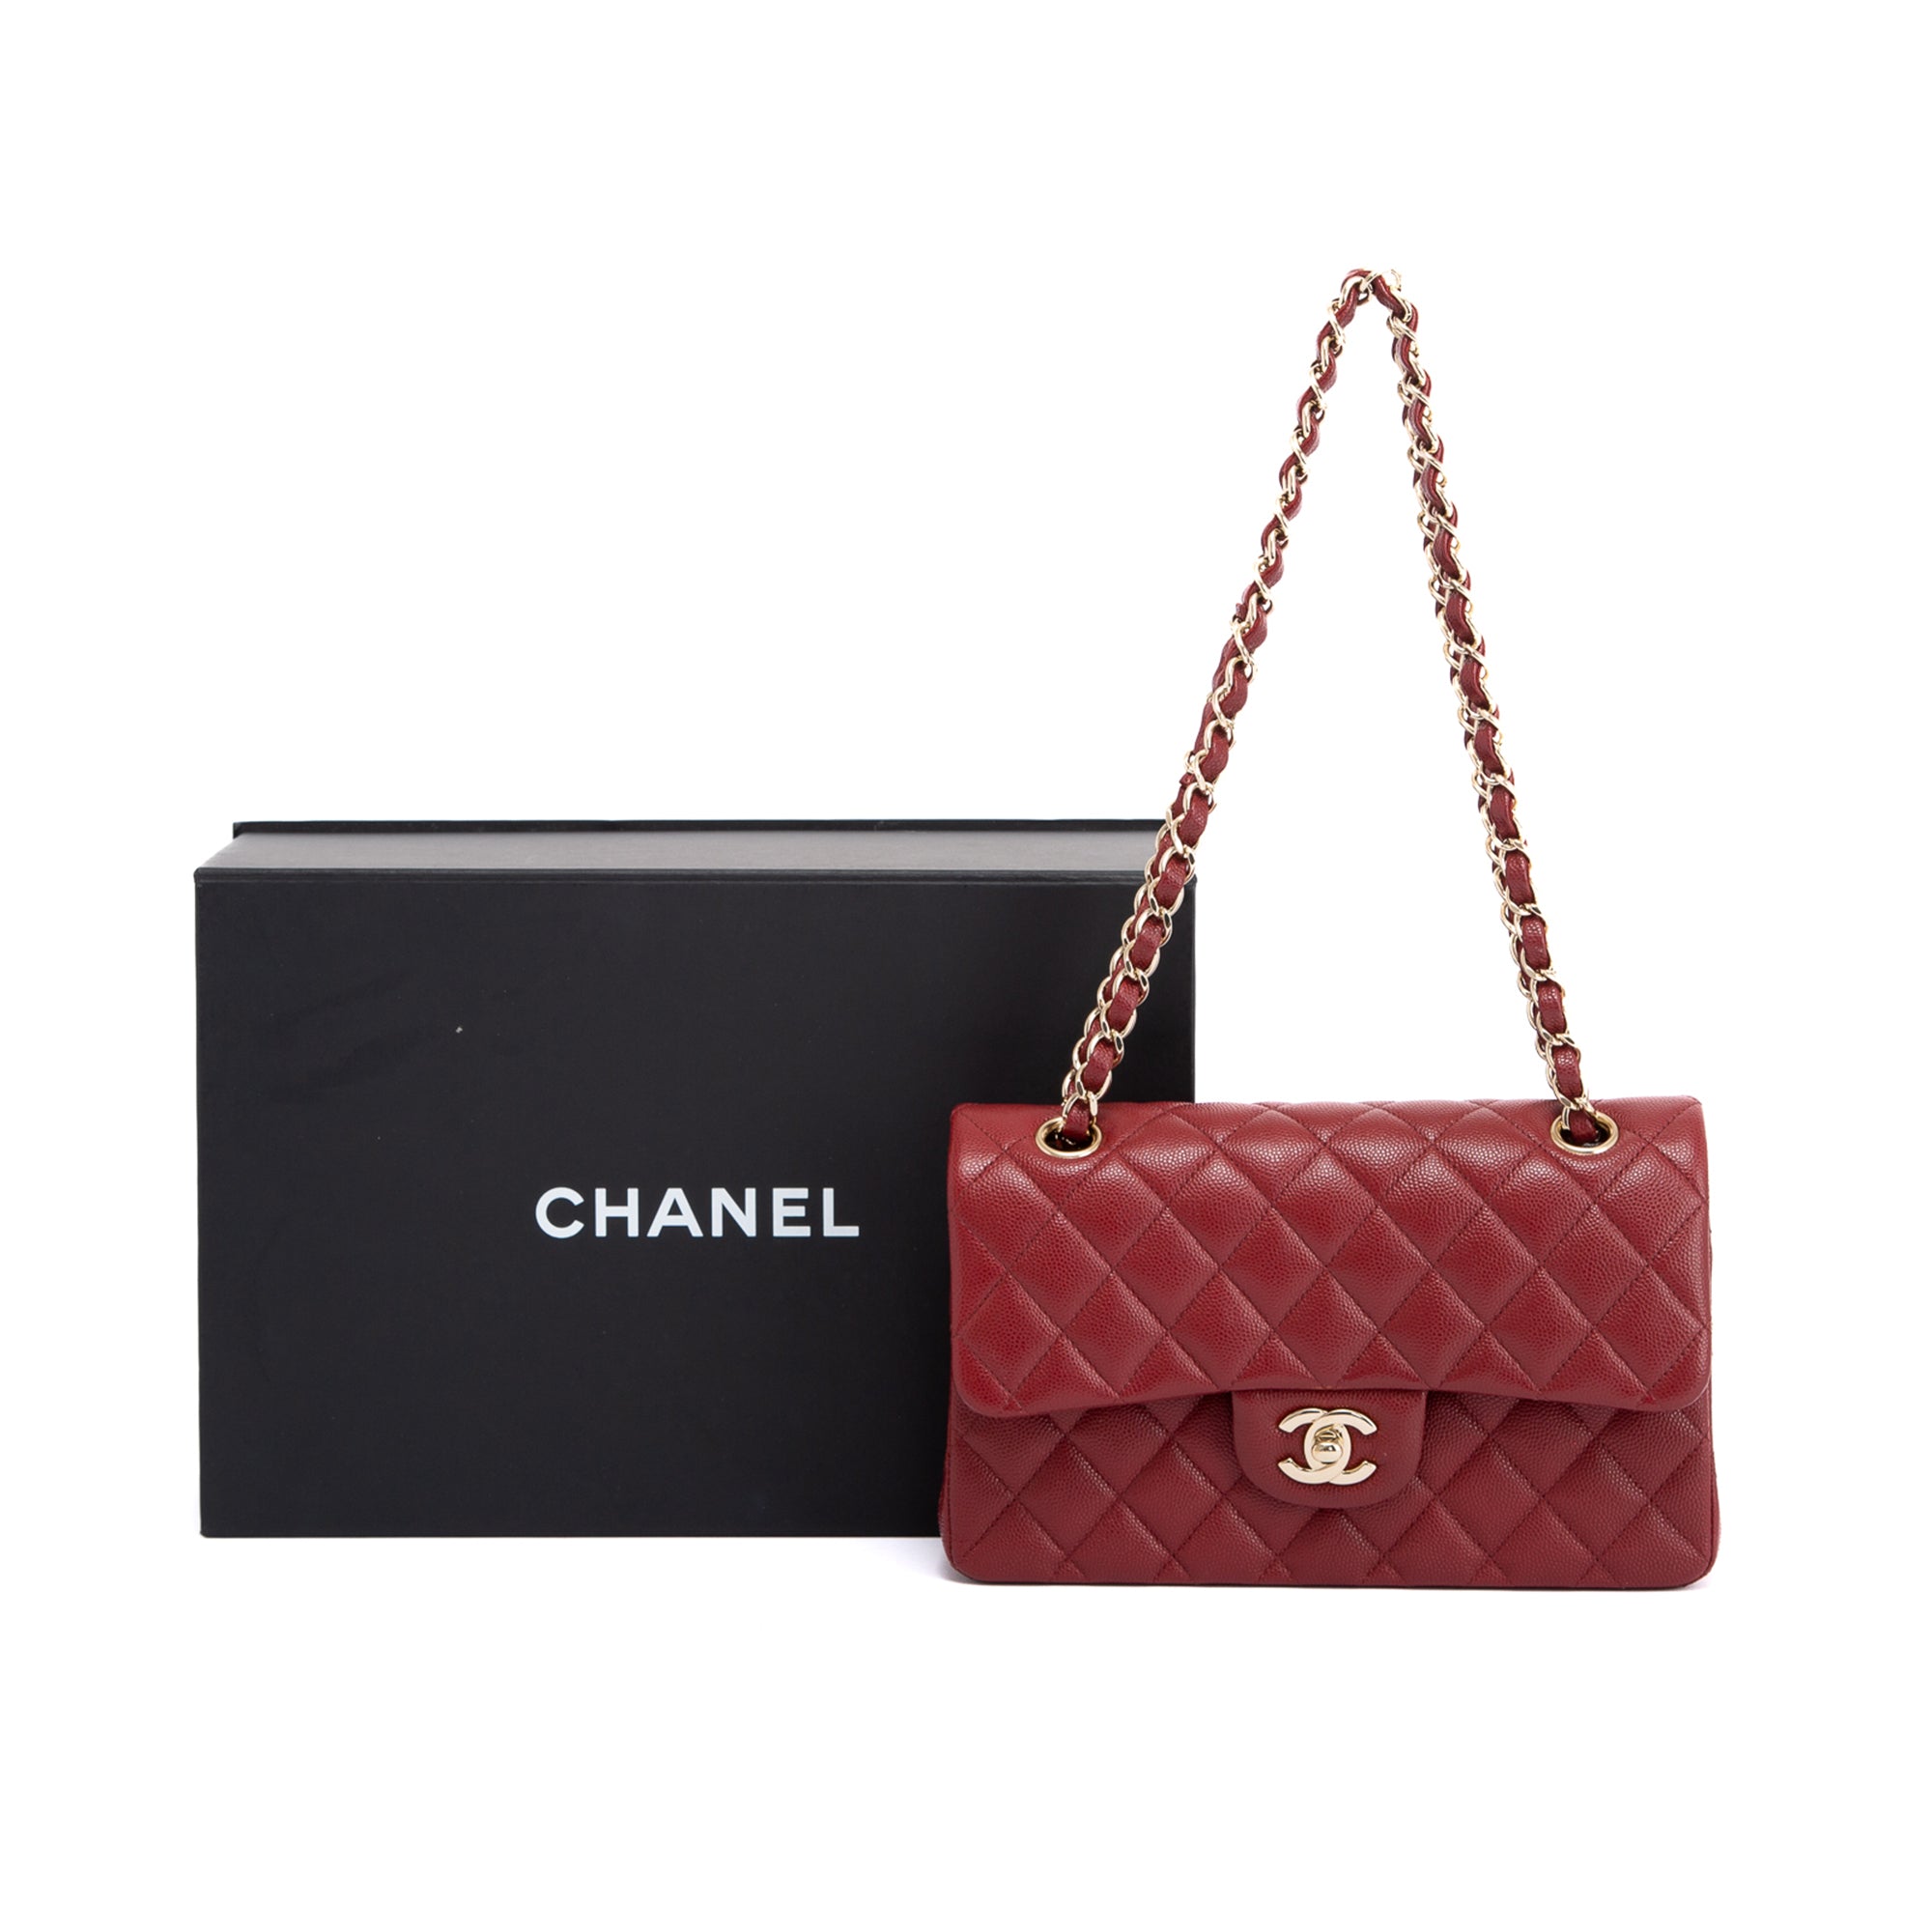 CHANEL Buckle Small Bags & Handbags for Women